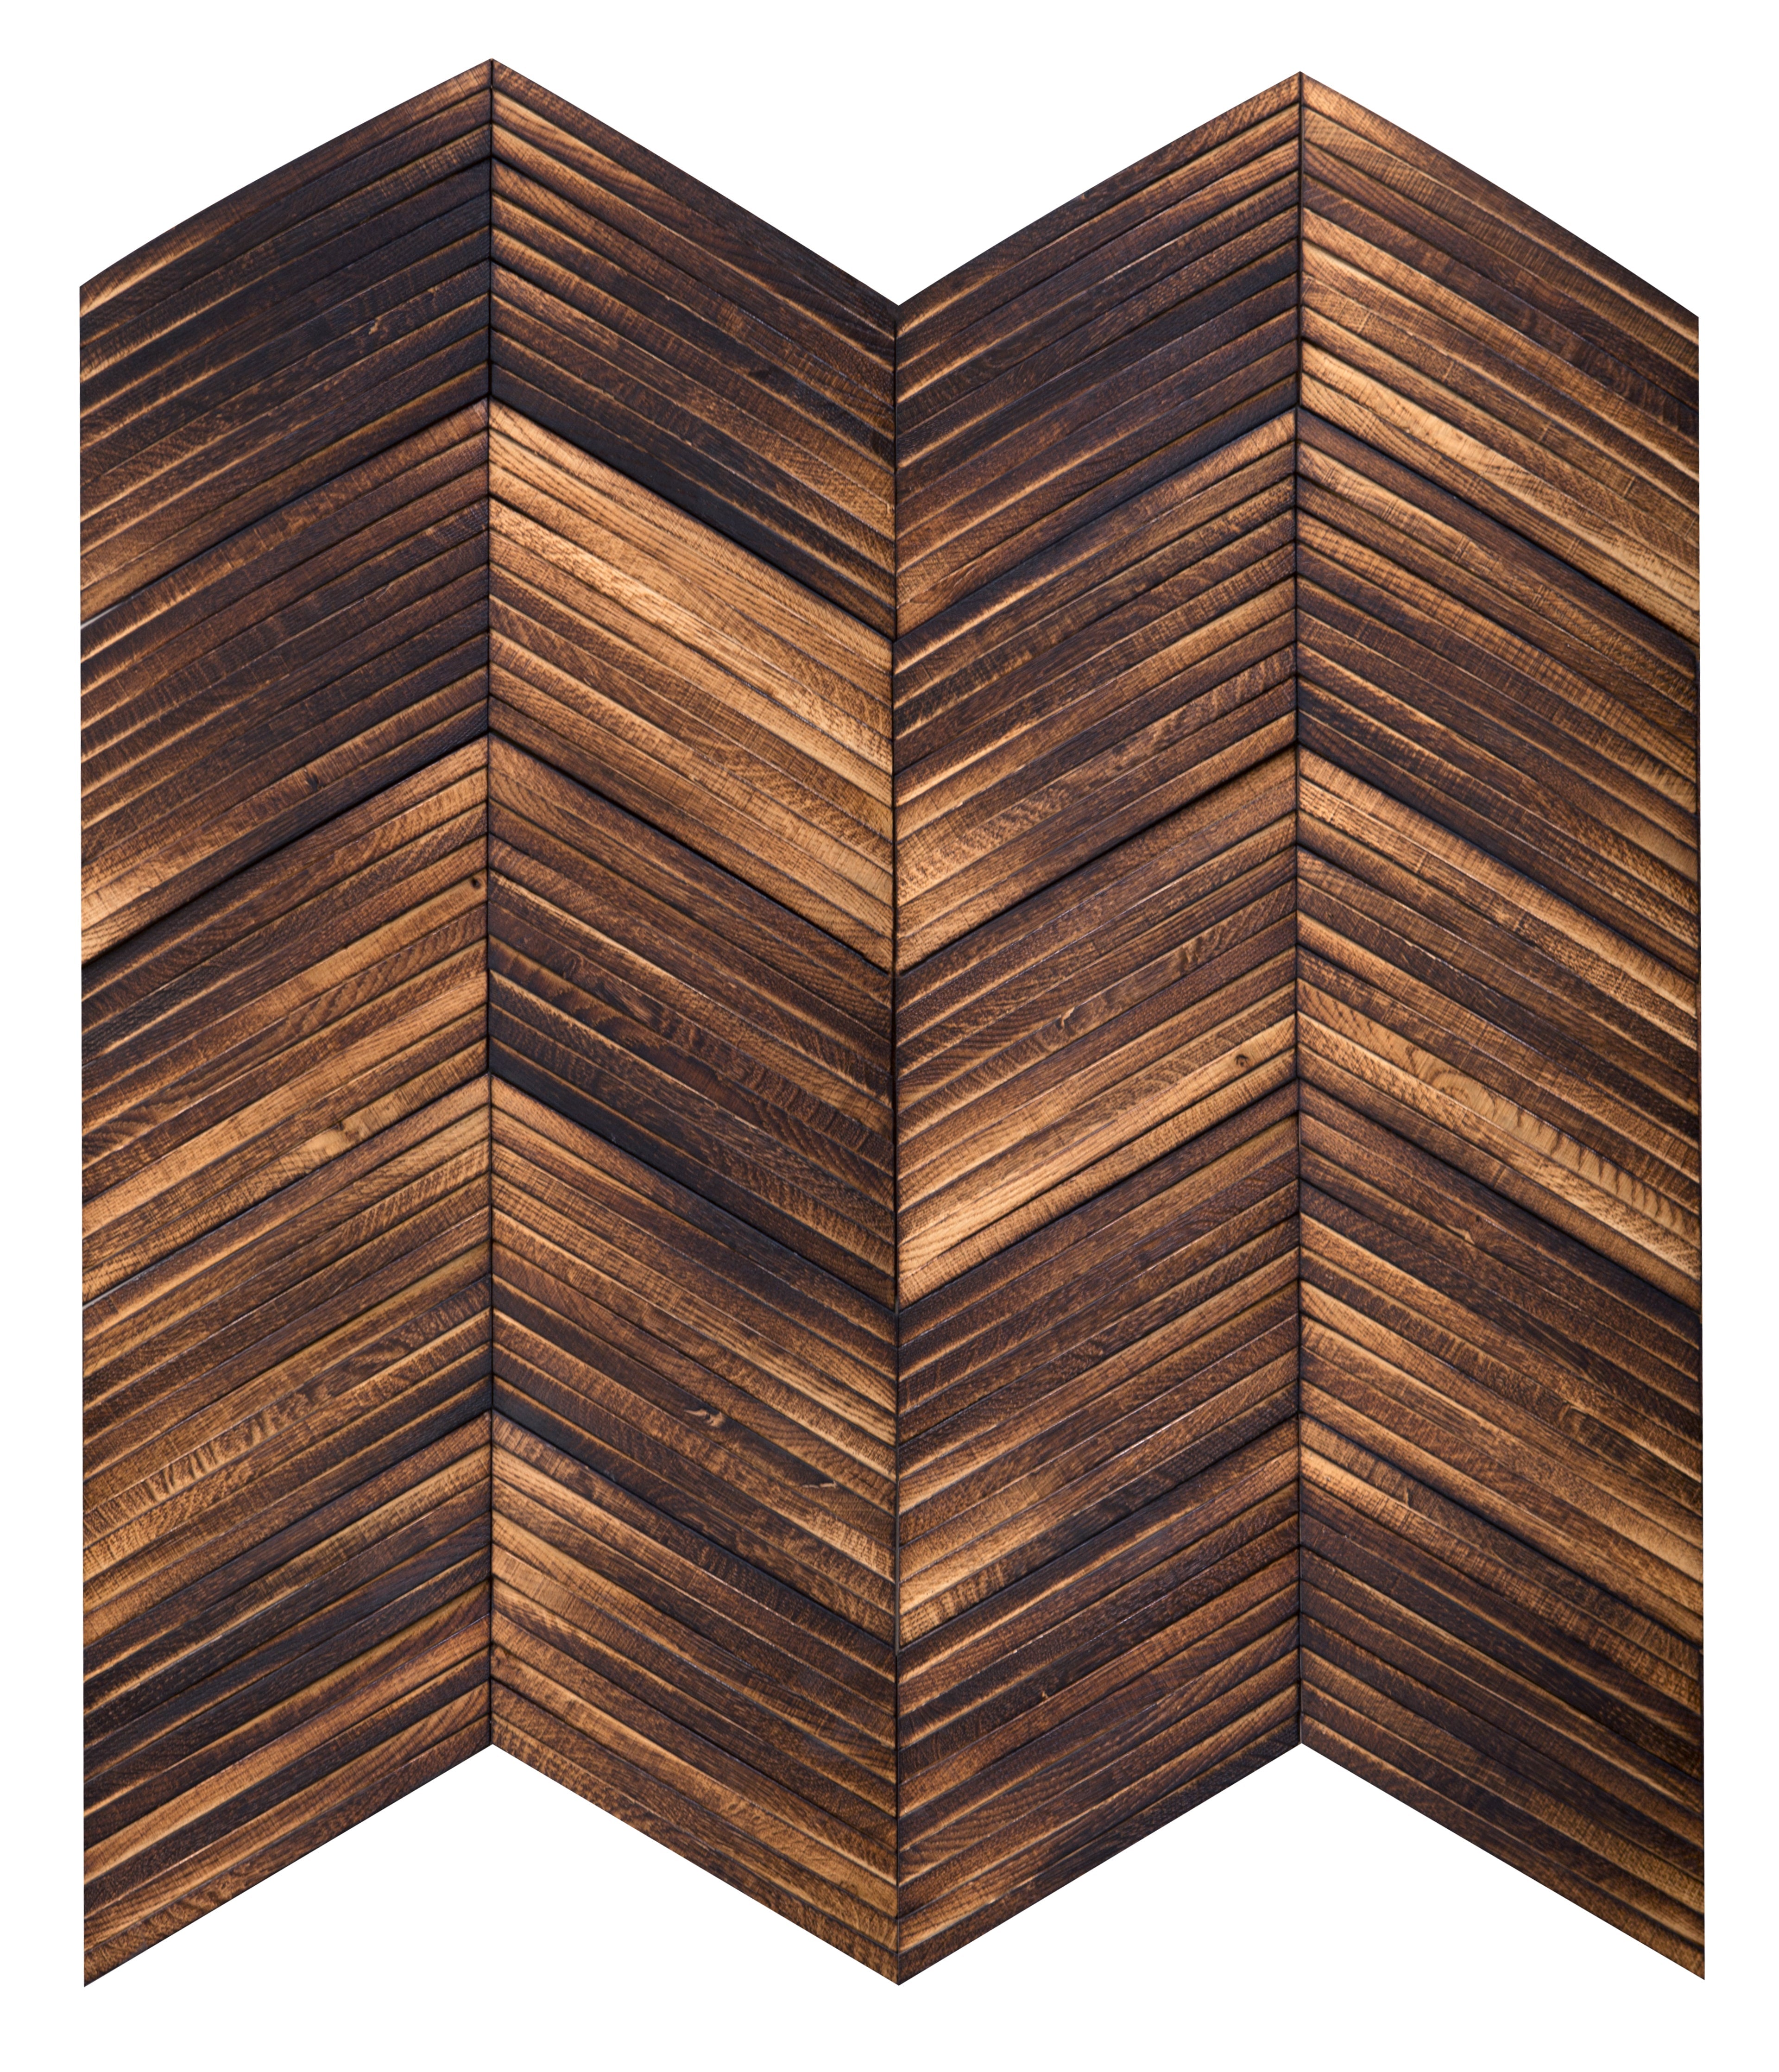 duchateau inceptiv ark chevron tabak oak three dimensional wall natural wood panel hard wax oil for interior use distributed by surface group international